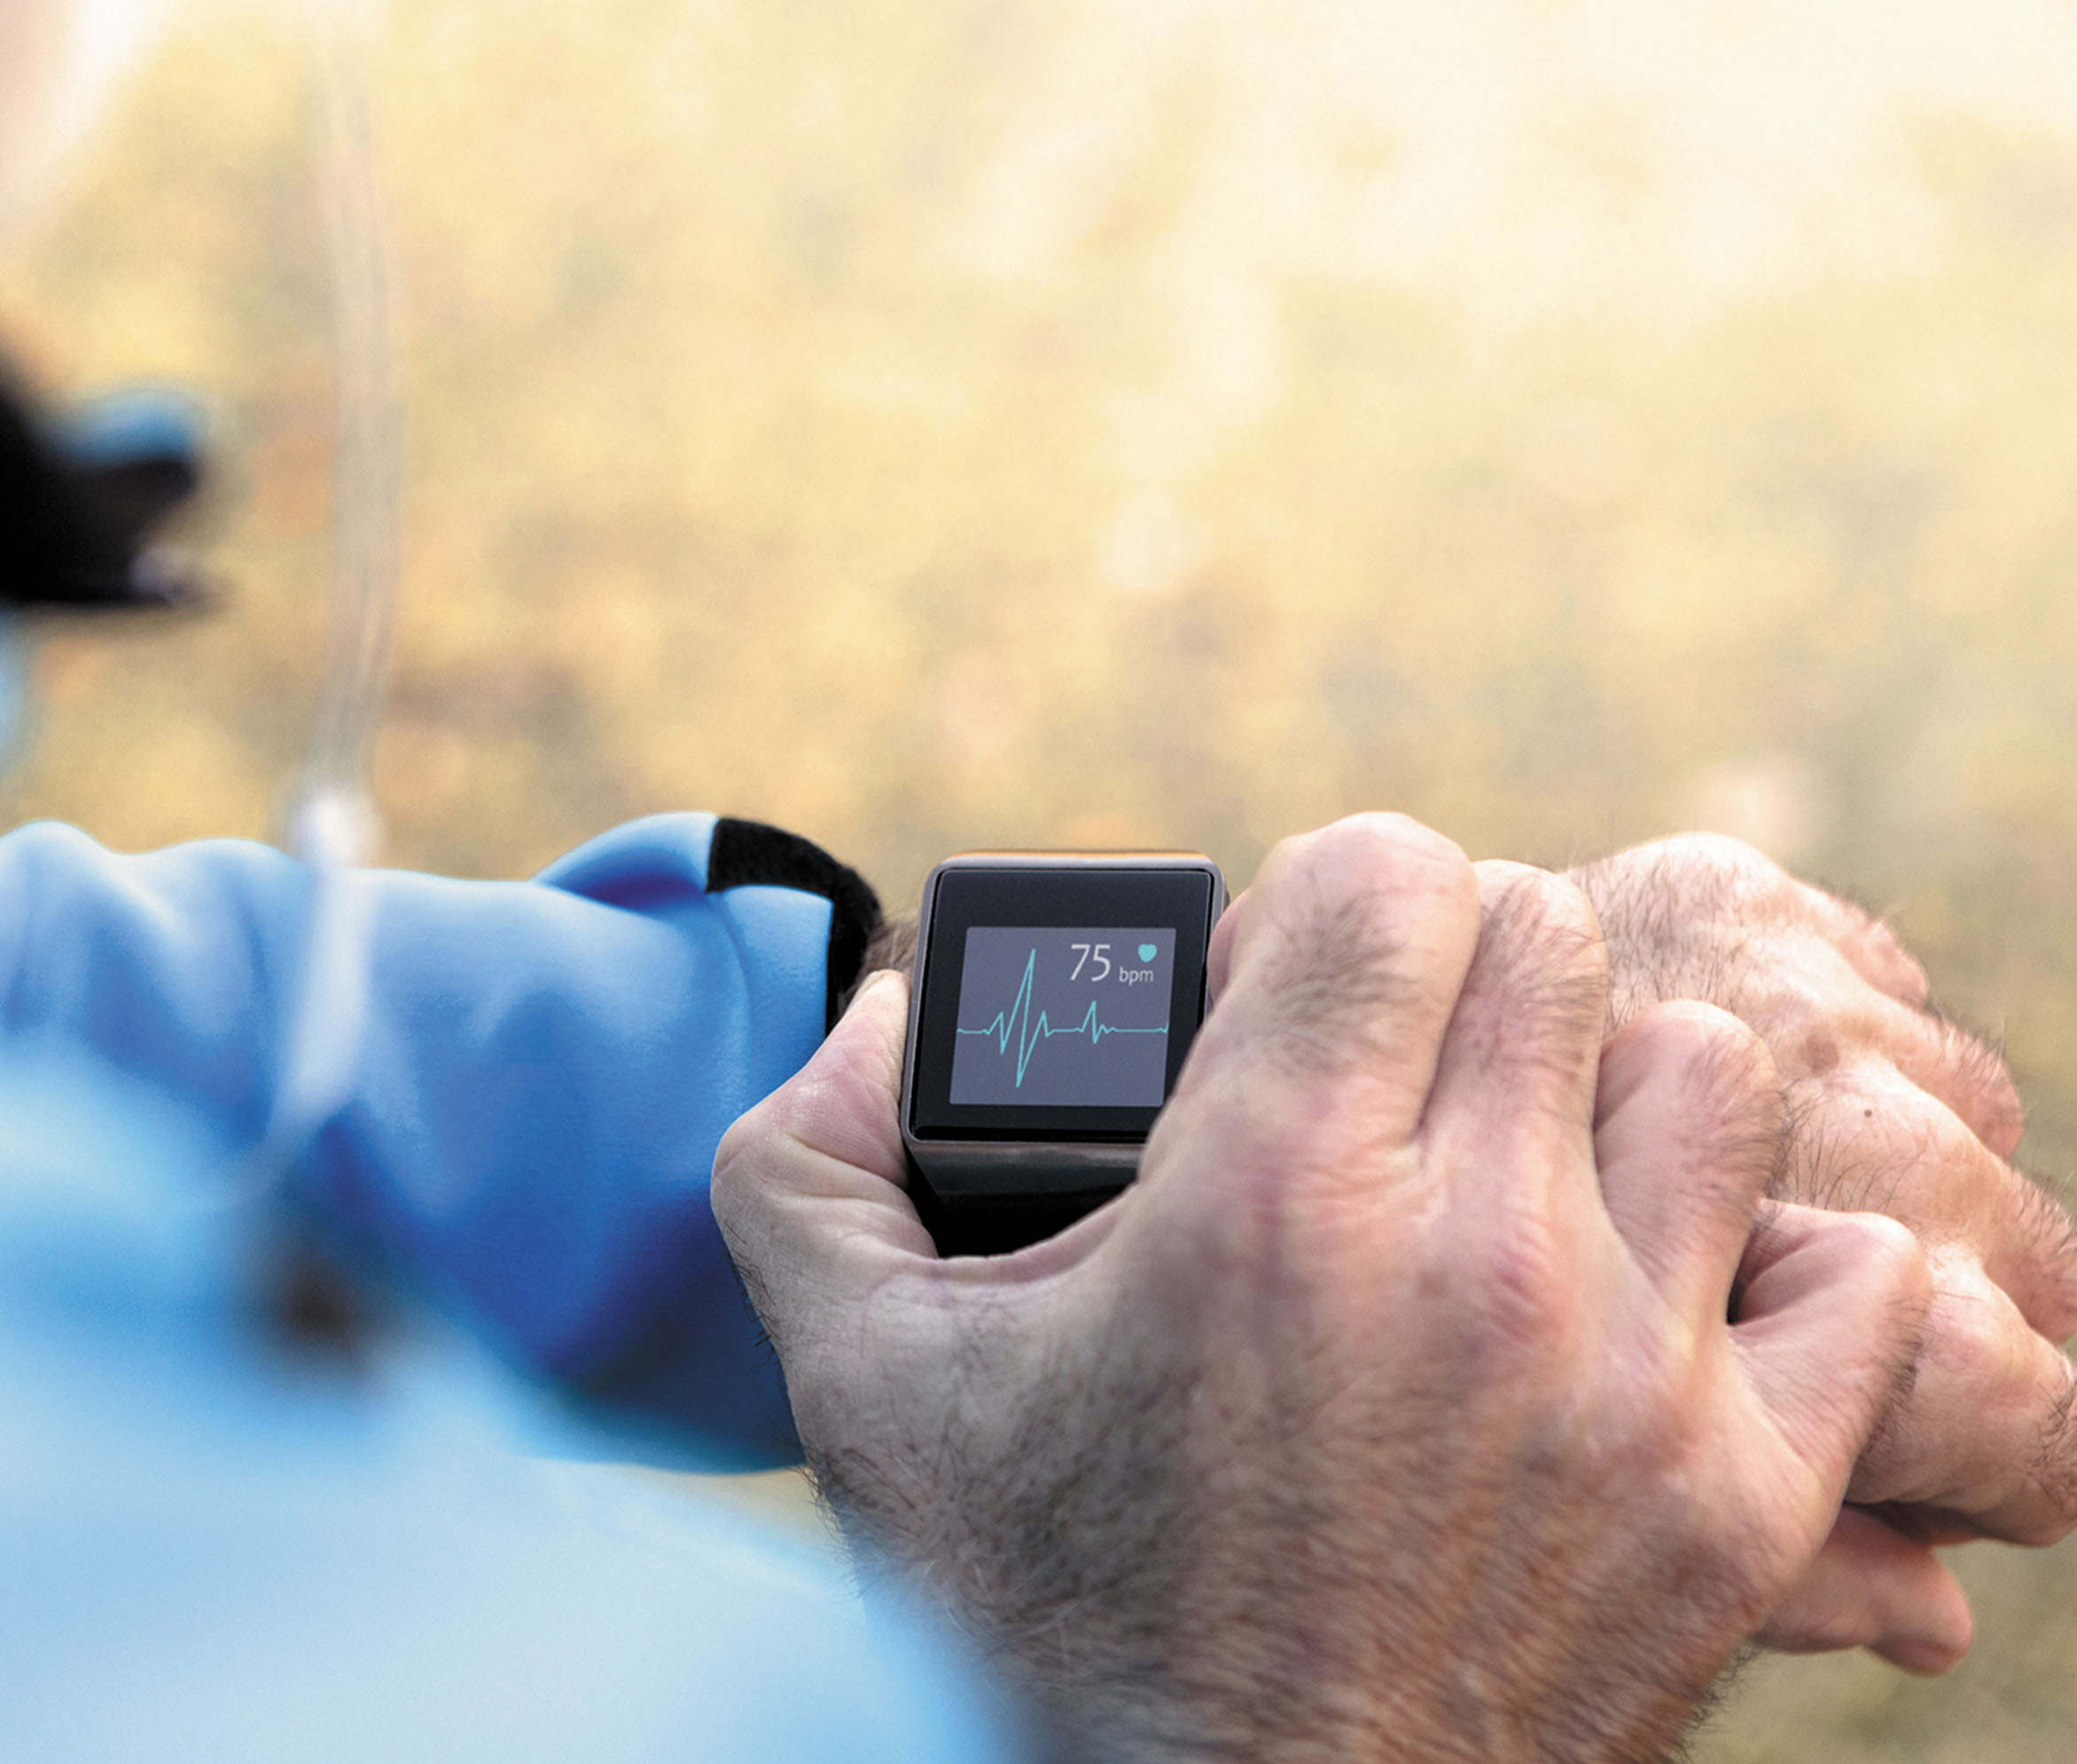 close-up photo of the wrist and hands of a man using a smartwatch that is showing a heart monitoring function